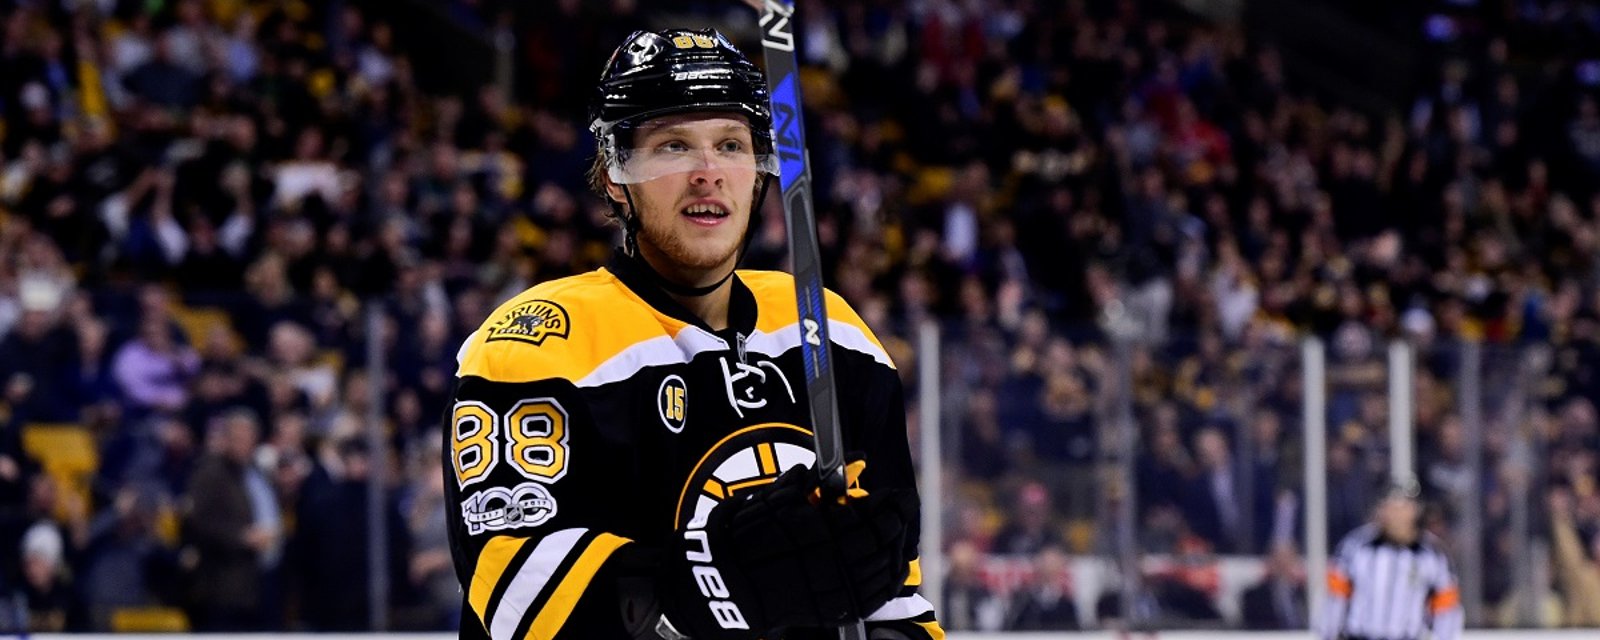 Breaking: Pastrnak's agent confirms he will be looking for a major contract.